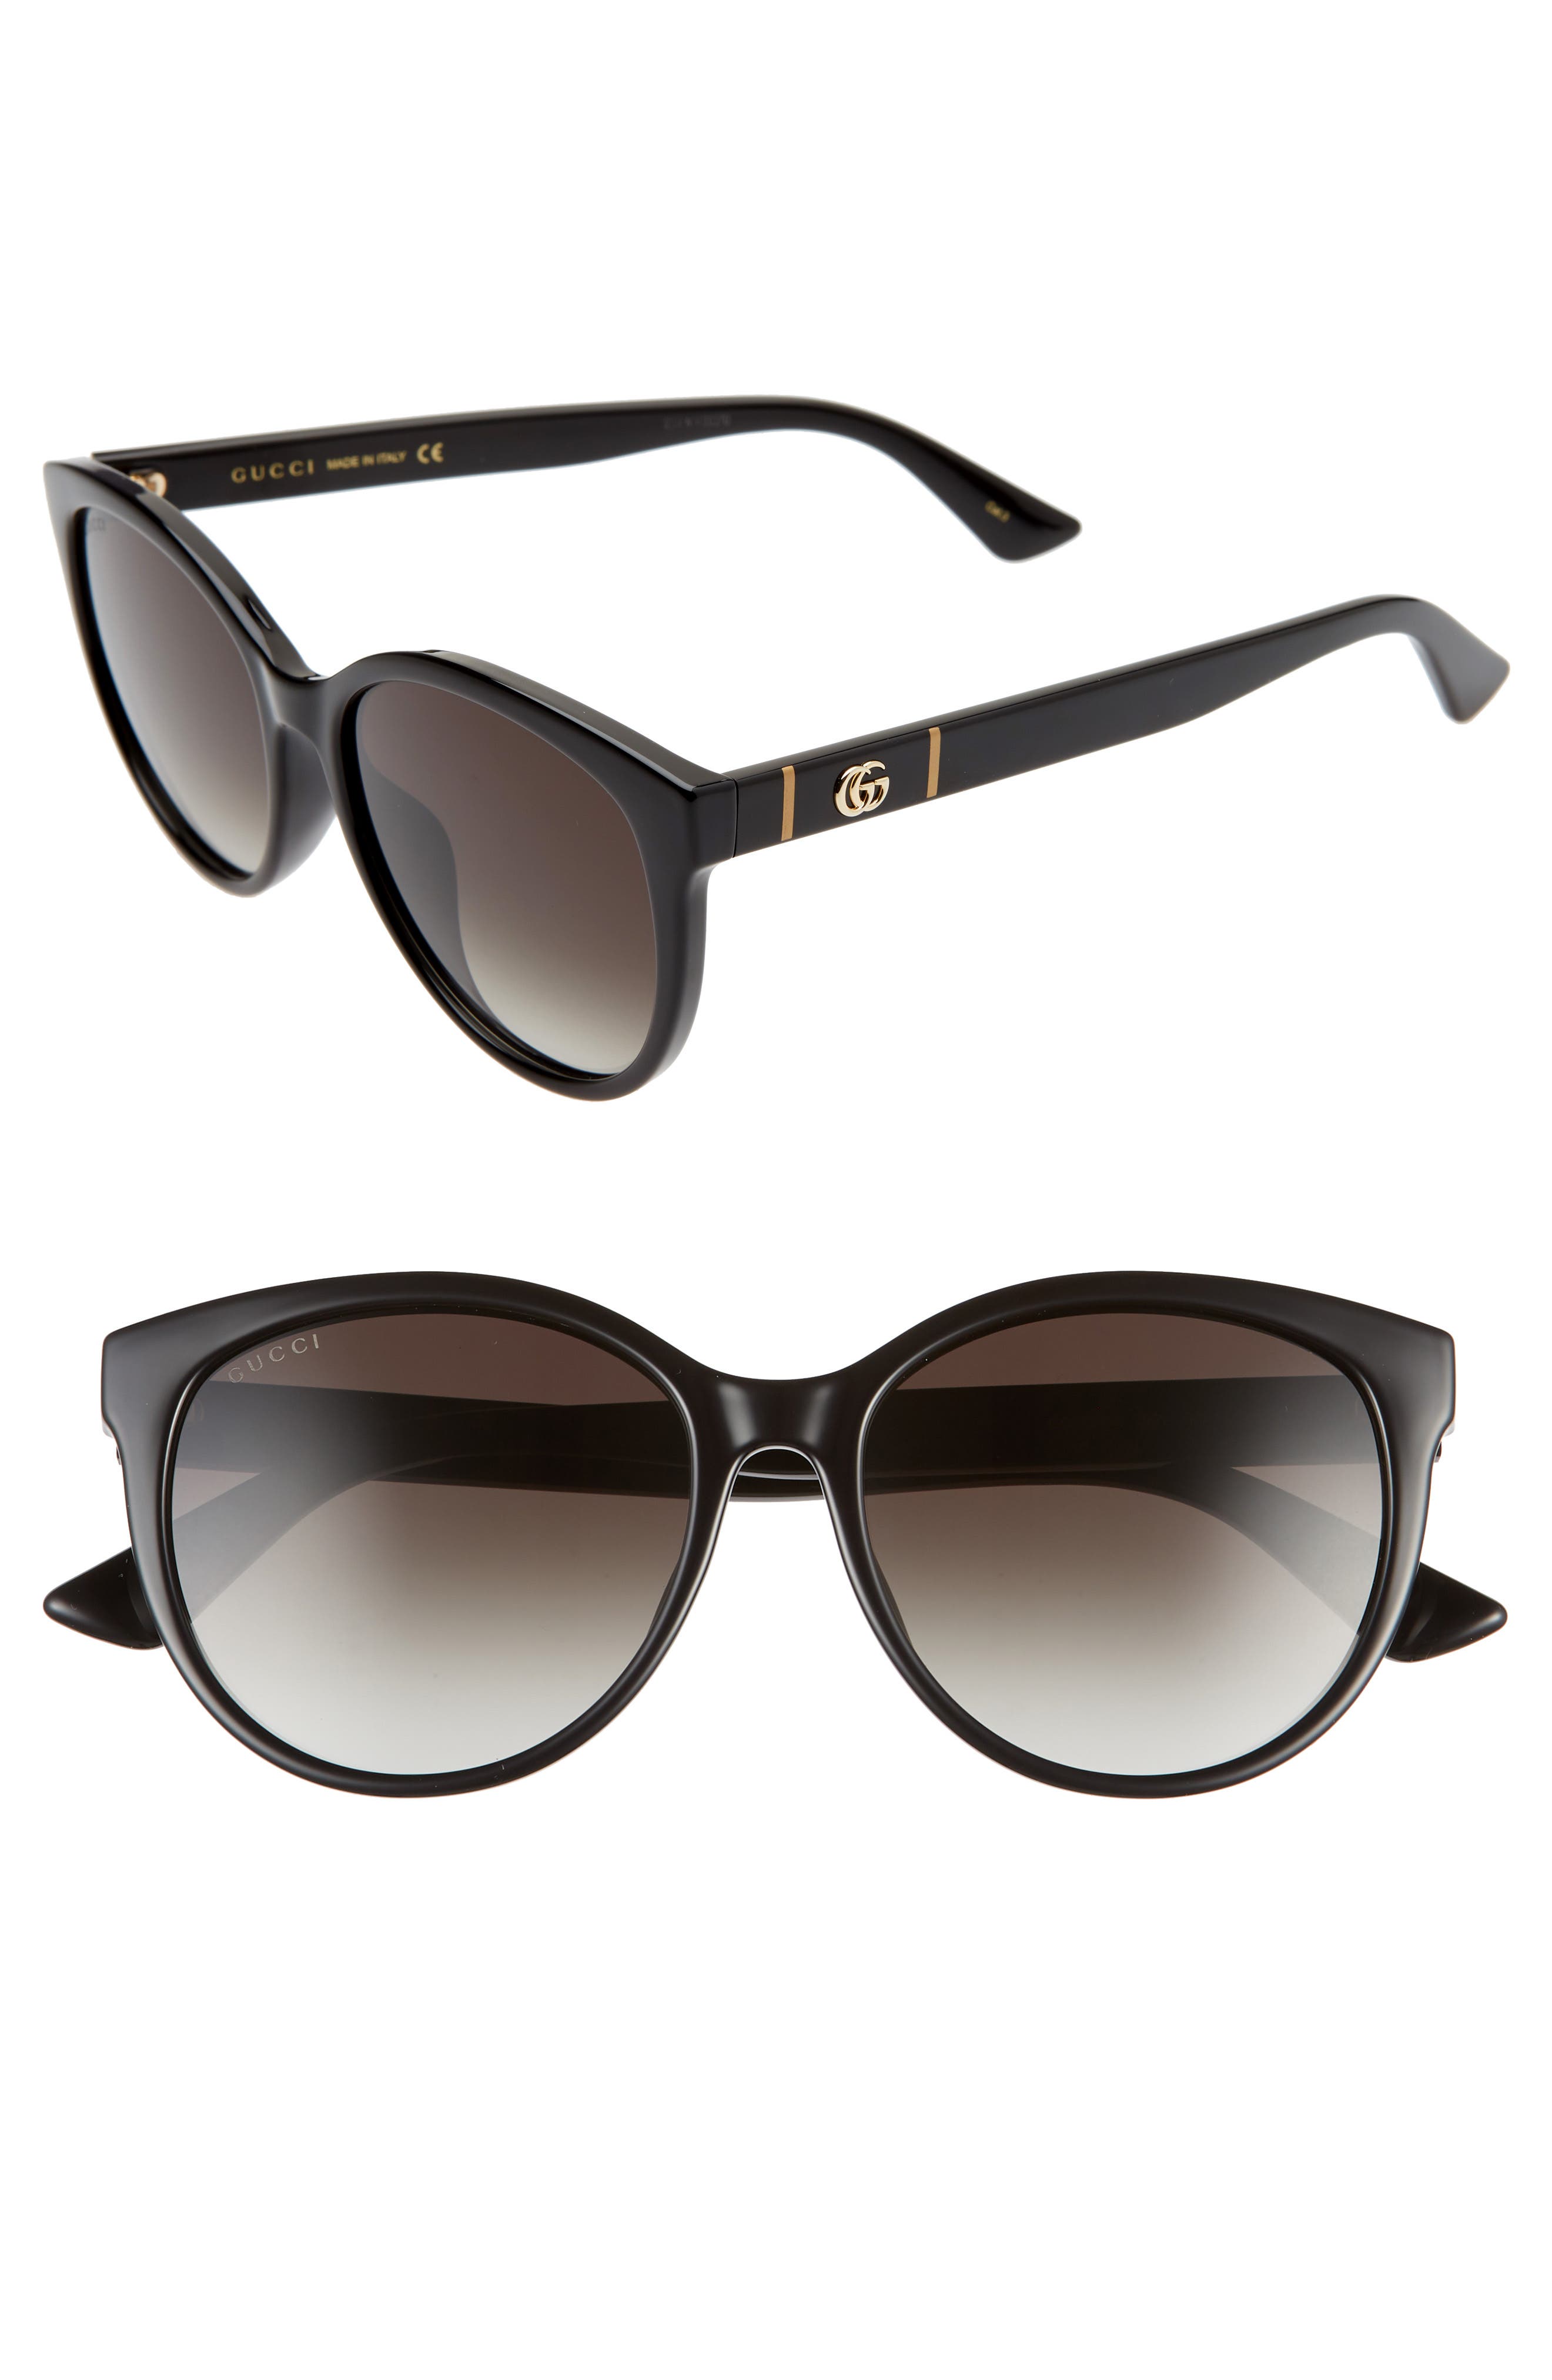 Gucci 56mm Gradient Cat Eye Sunglasses in Black/Grey at Nordstrom